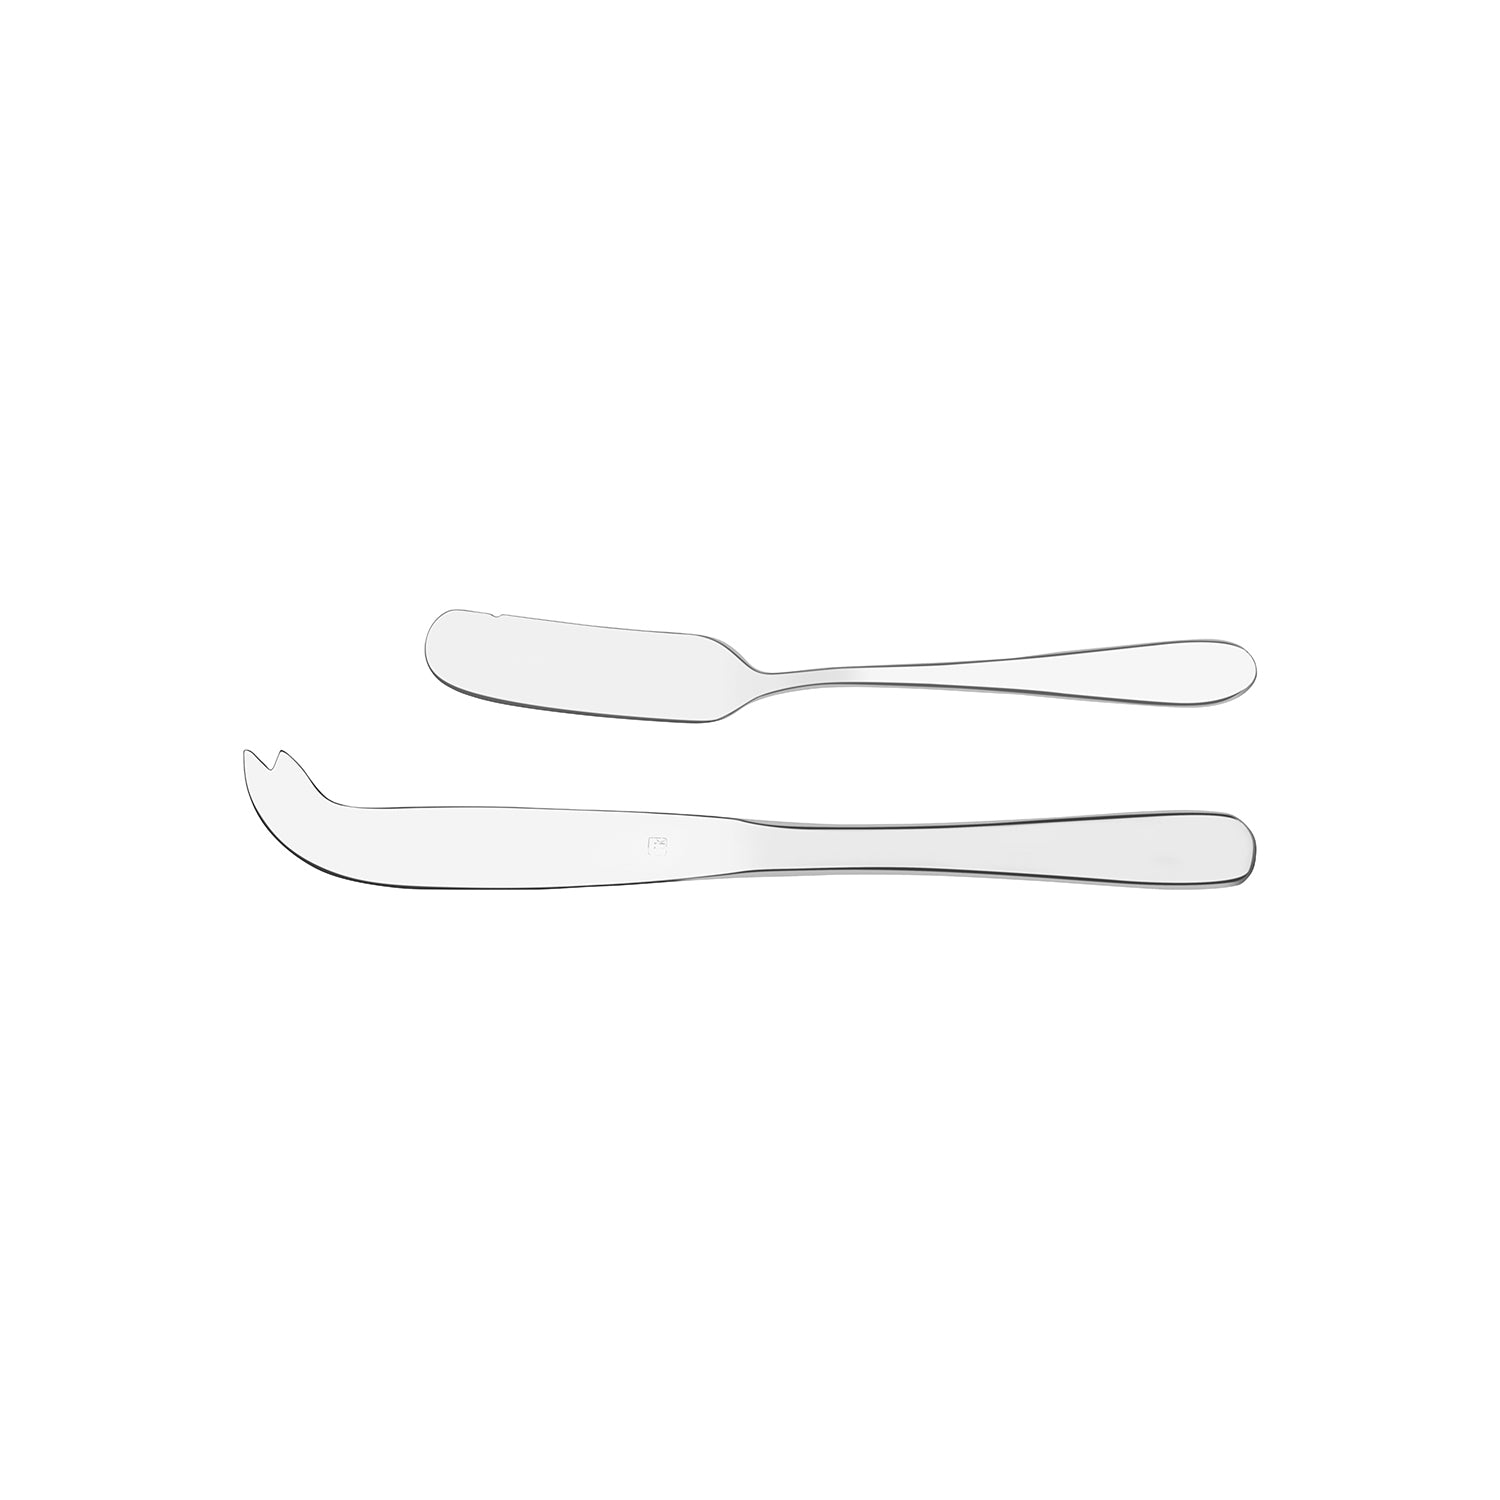 17600-19 Tablekraft Luxor Cheese and Butter Knife Set 2pc Tomkin Australia Hospitality Supplies